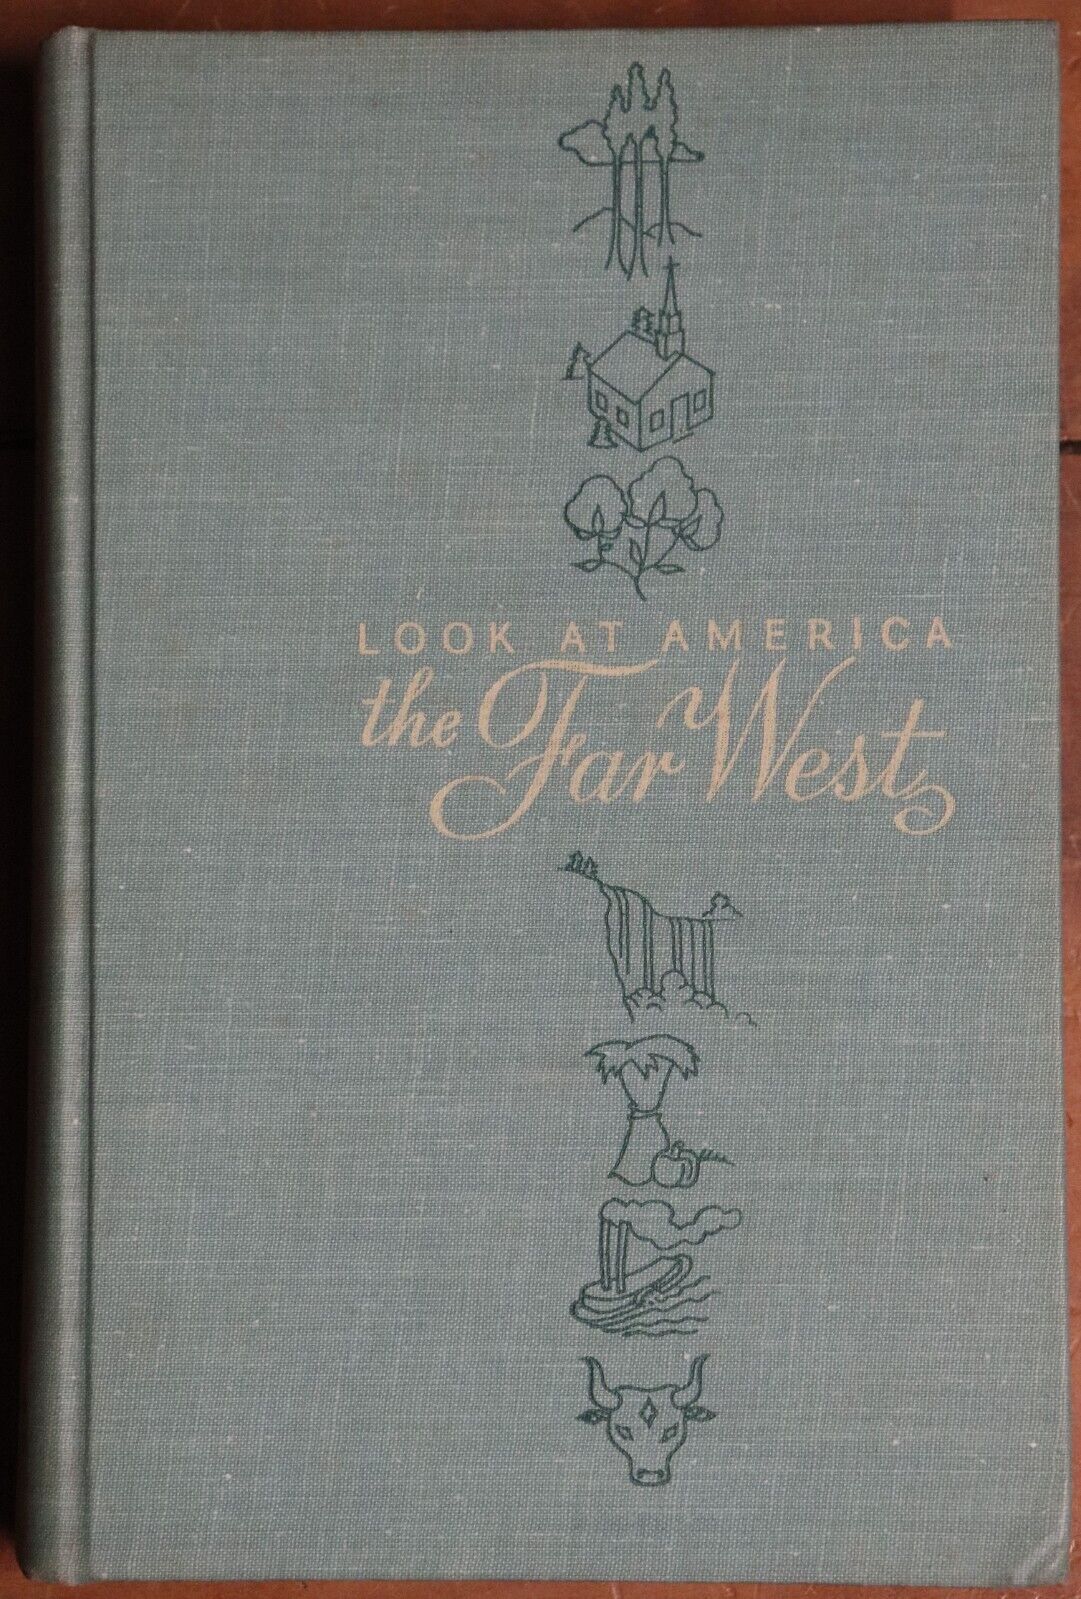 Look at America: The Far West - 1948 - 1st Edition Vintage Book